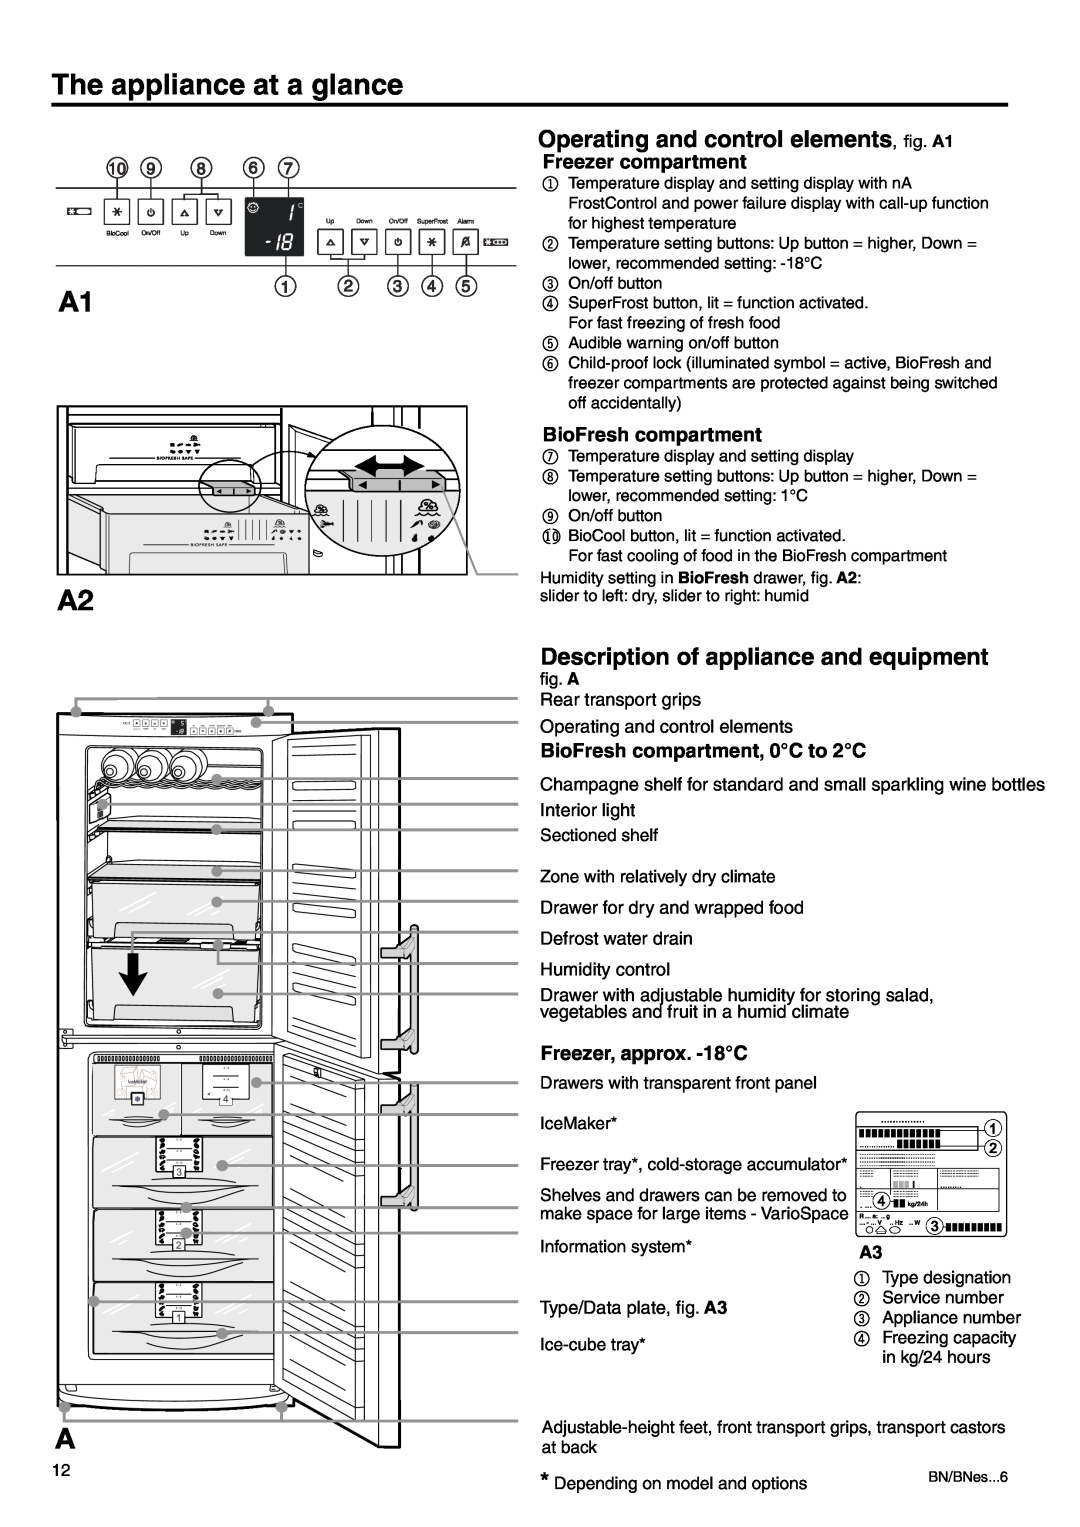 Liebherr 7082 218-03 manual The appliance at a glance, Operating and control elements, ﬁg. A1, Freezer compartment 